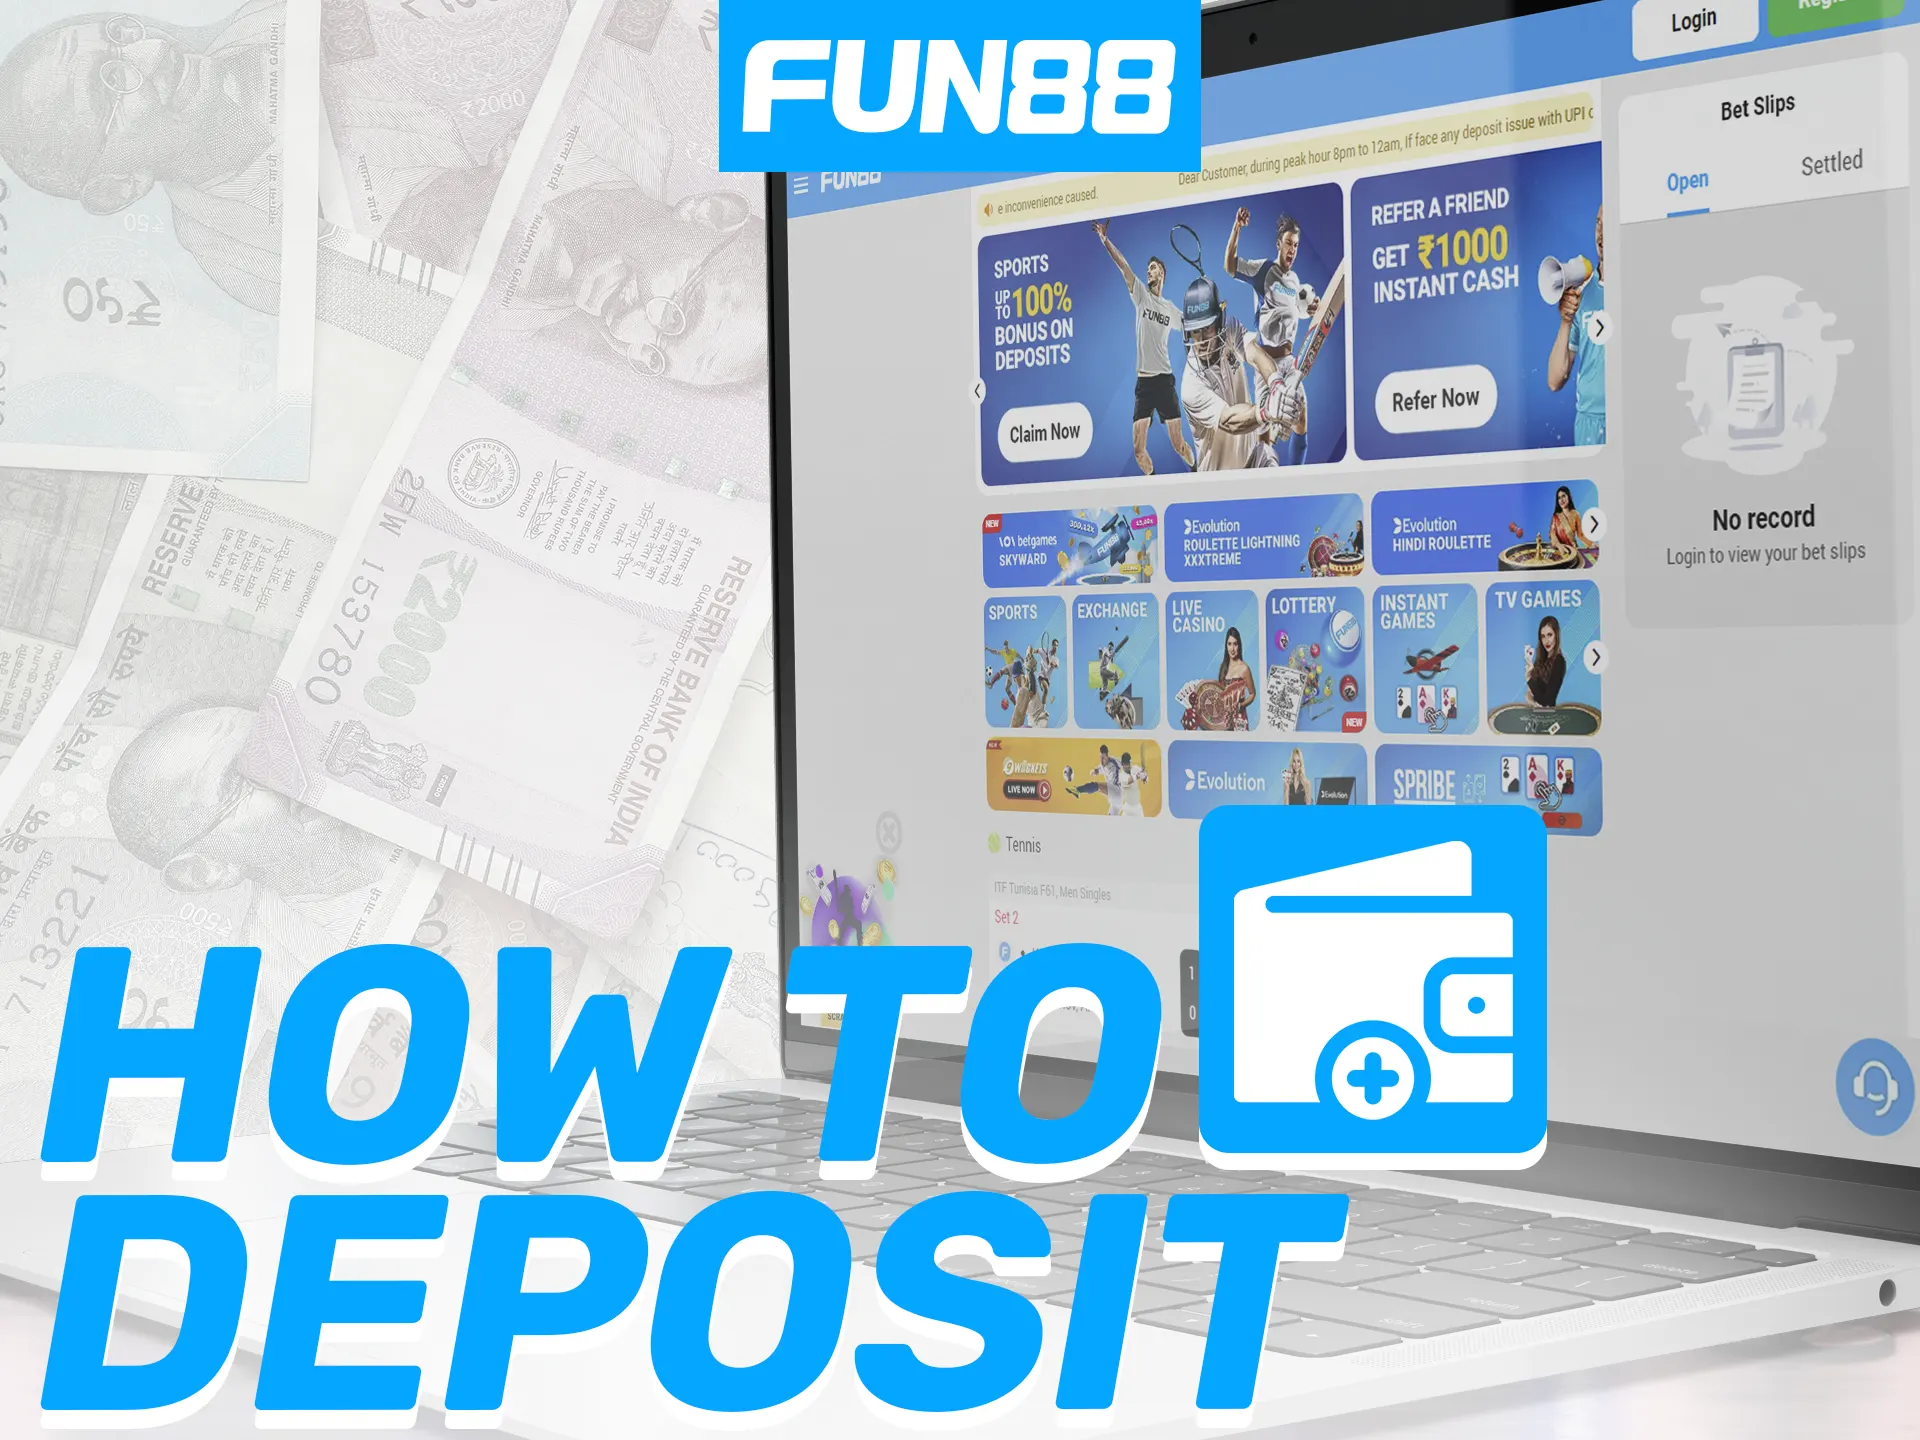 Deposit at Fun88 by logging in, choosing a payment method, and confirming.